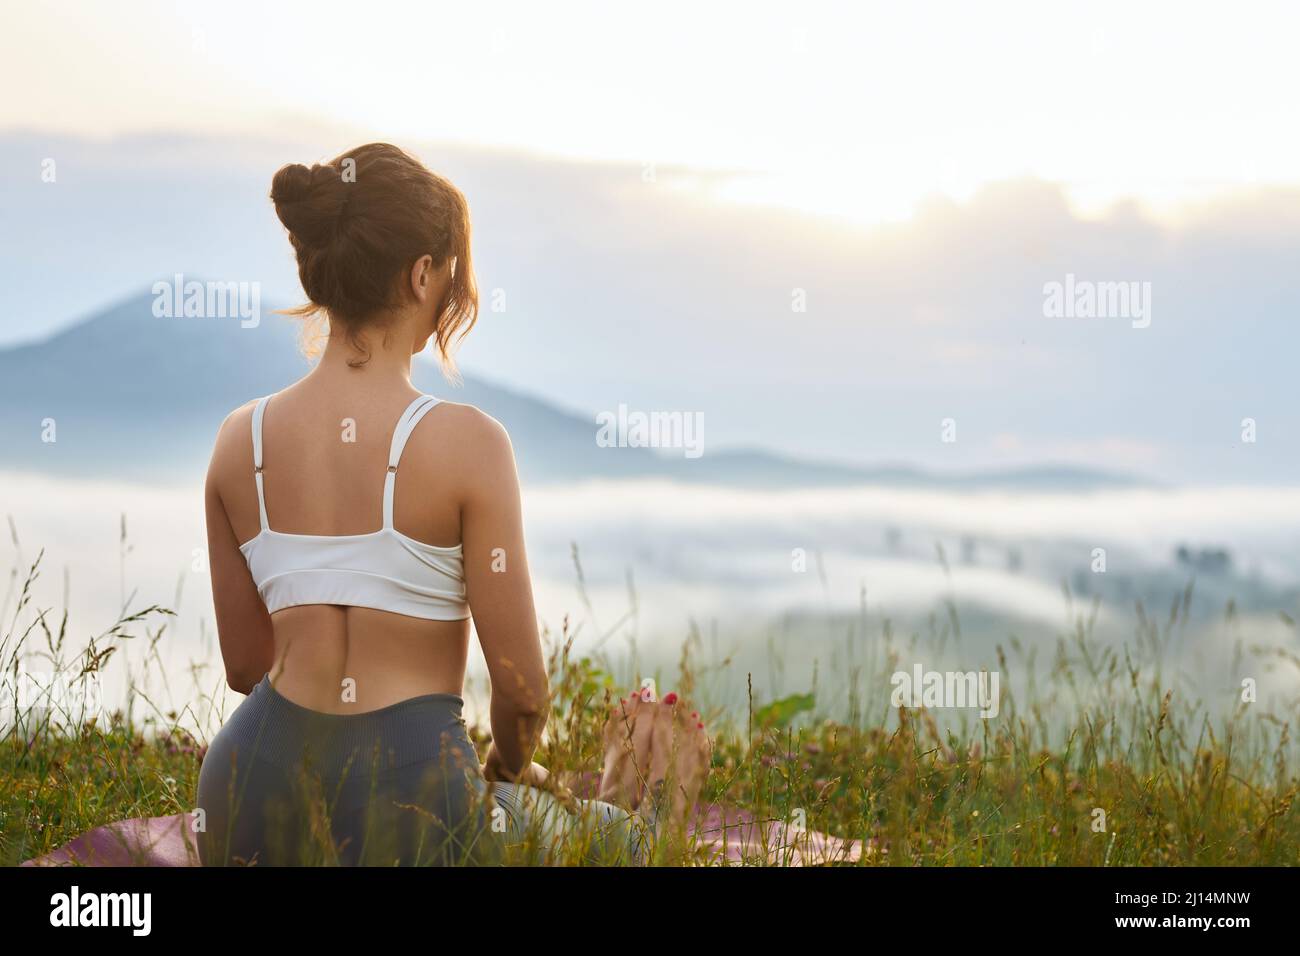 Back panoramic view of female sitting on legs with hands on knees. Woman looking forward, enjoying scenery, practicing yoga outdoors. Concept of harmo Stock Photo